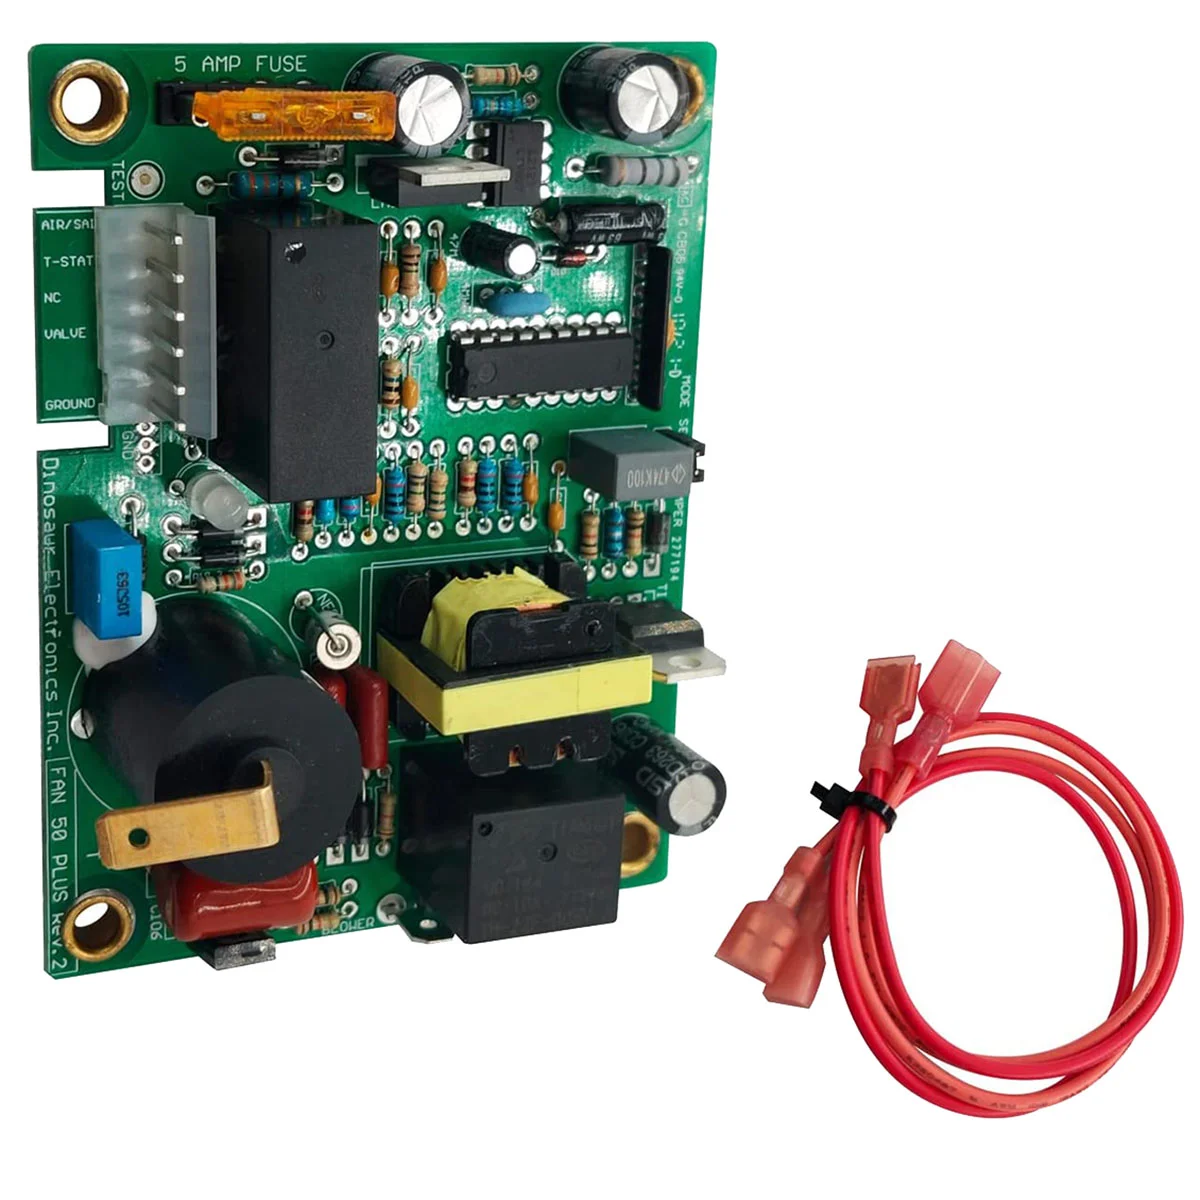 

Replace Fan 50 Plus Pins Ignitor Board with Fan Control Only for 12 VDC Furnaces